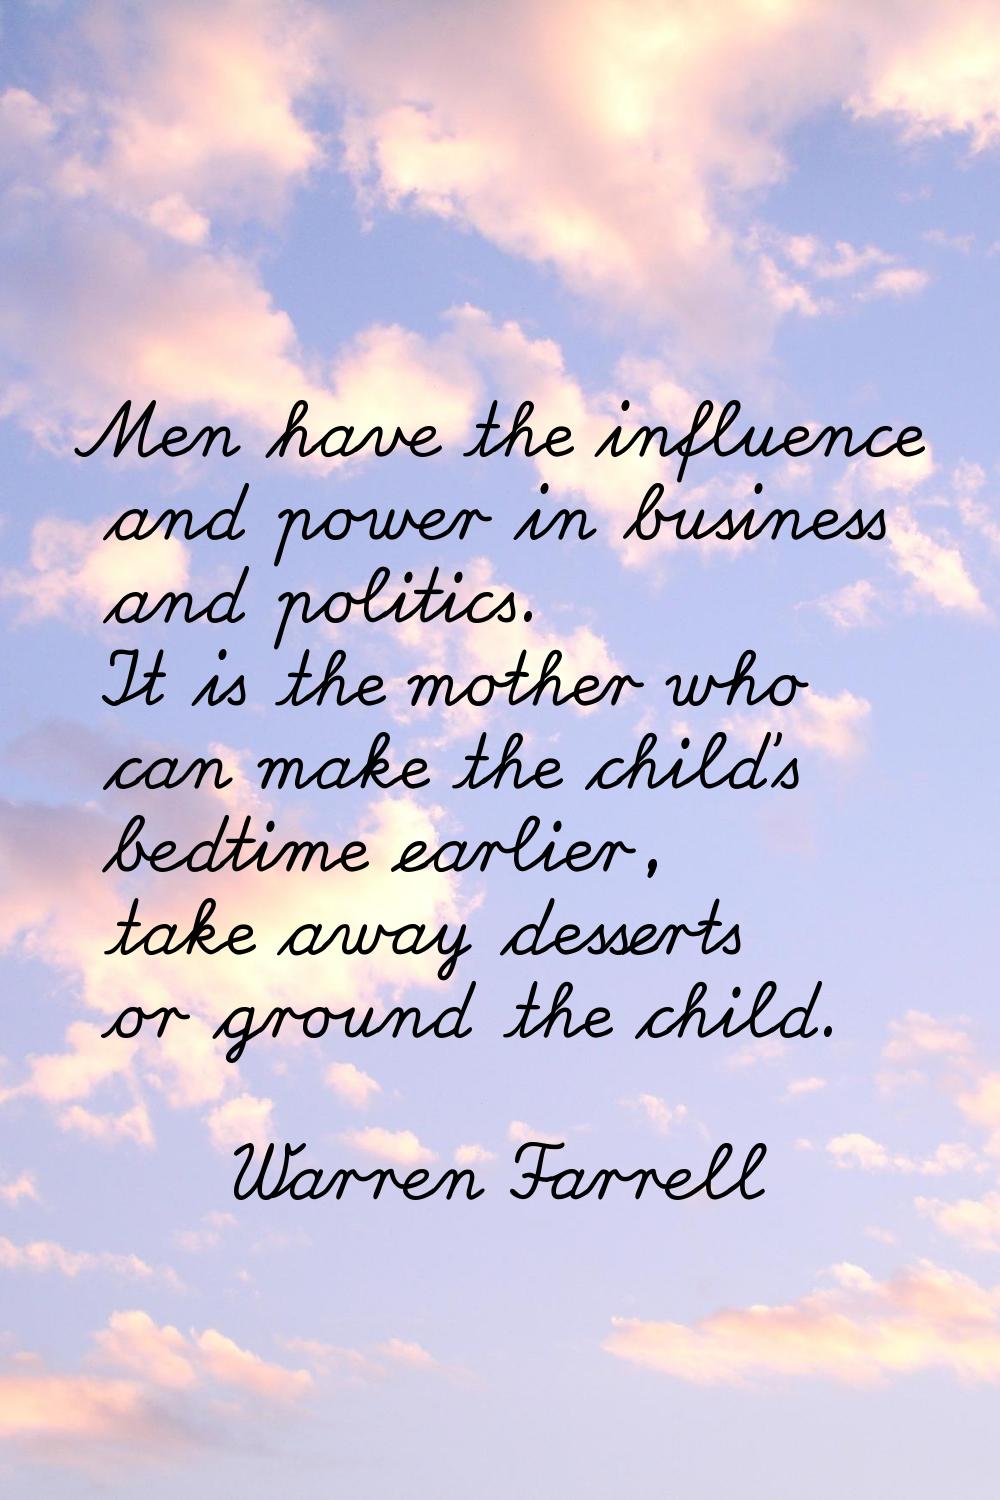 Men have the influence and power in business and politics. It is the mother who can make the child'